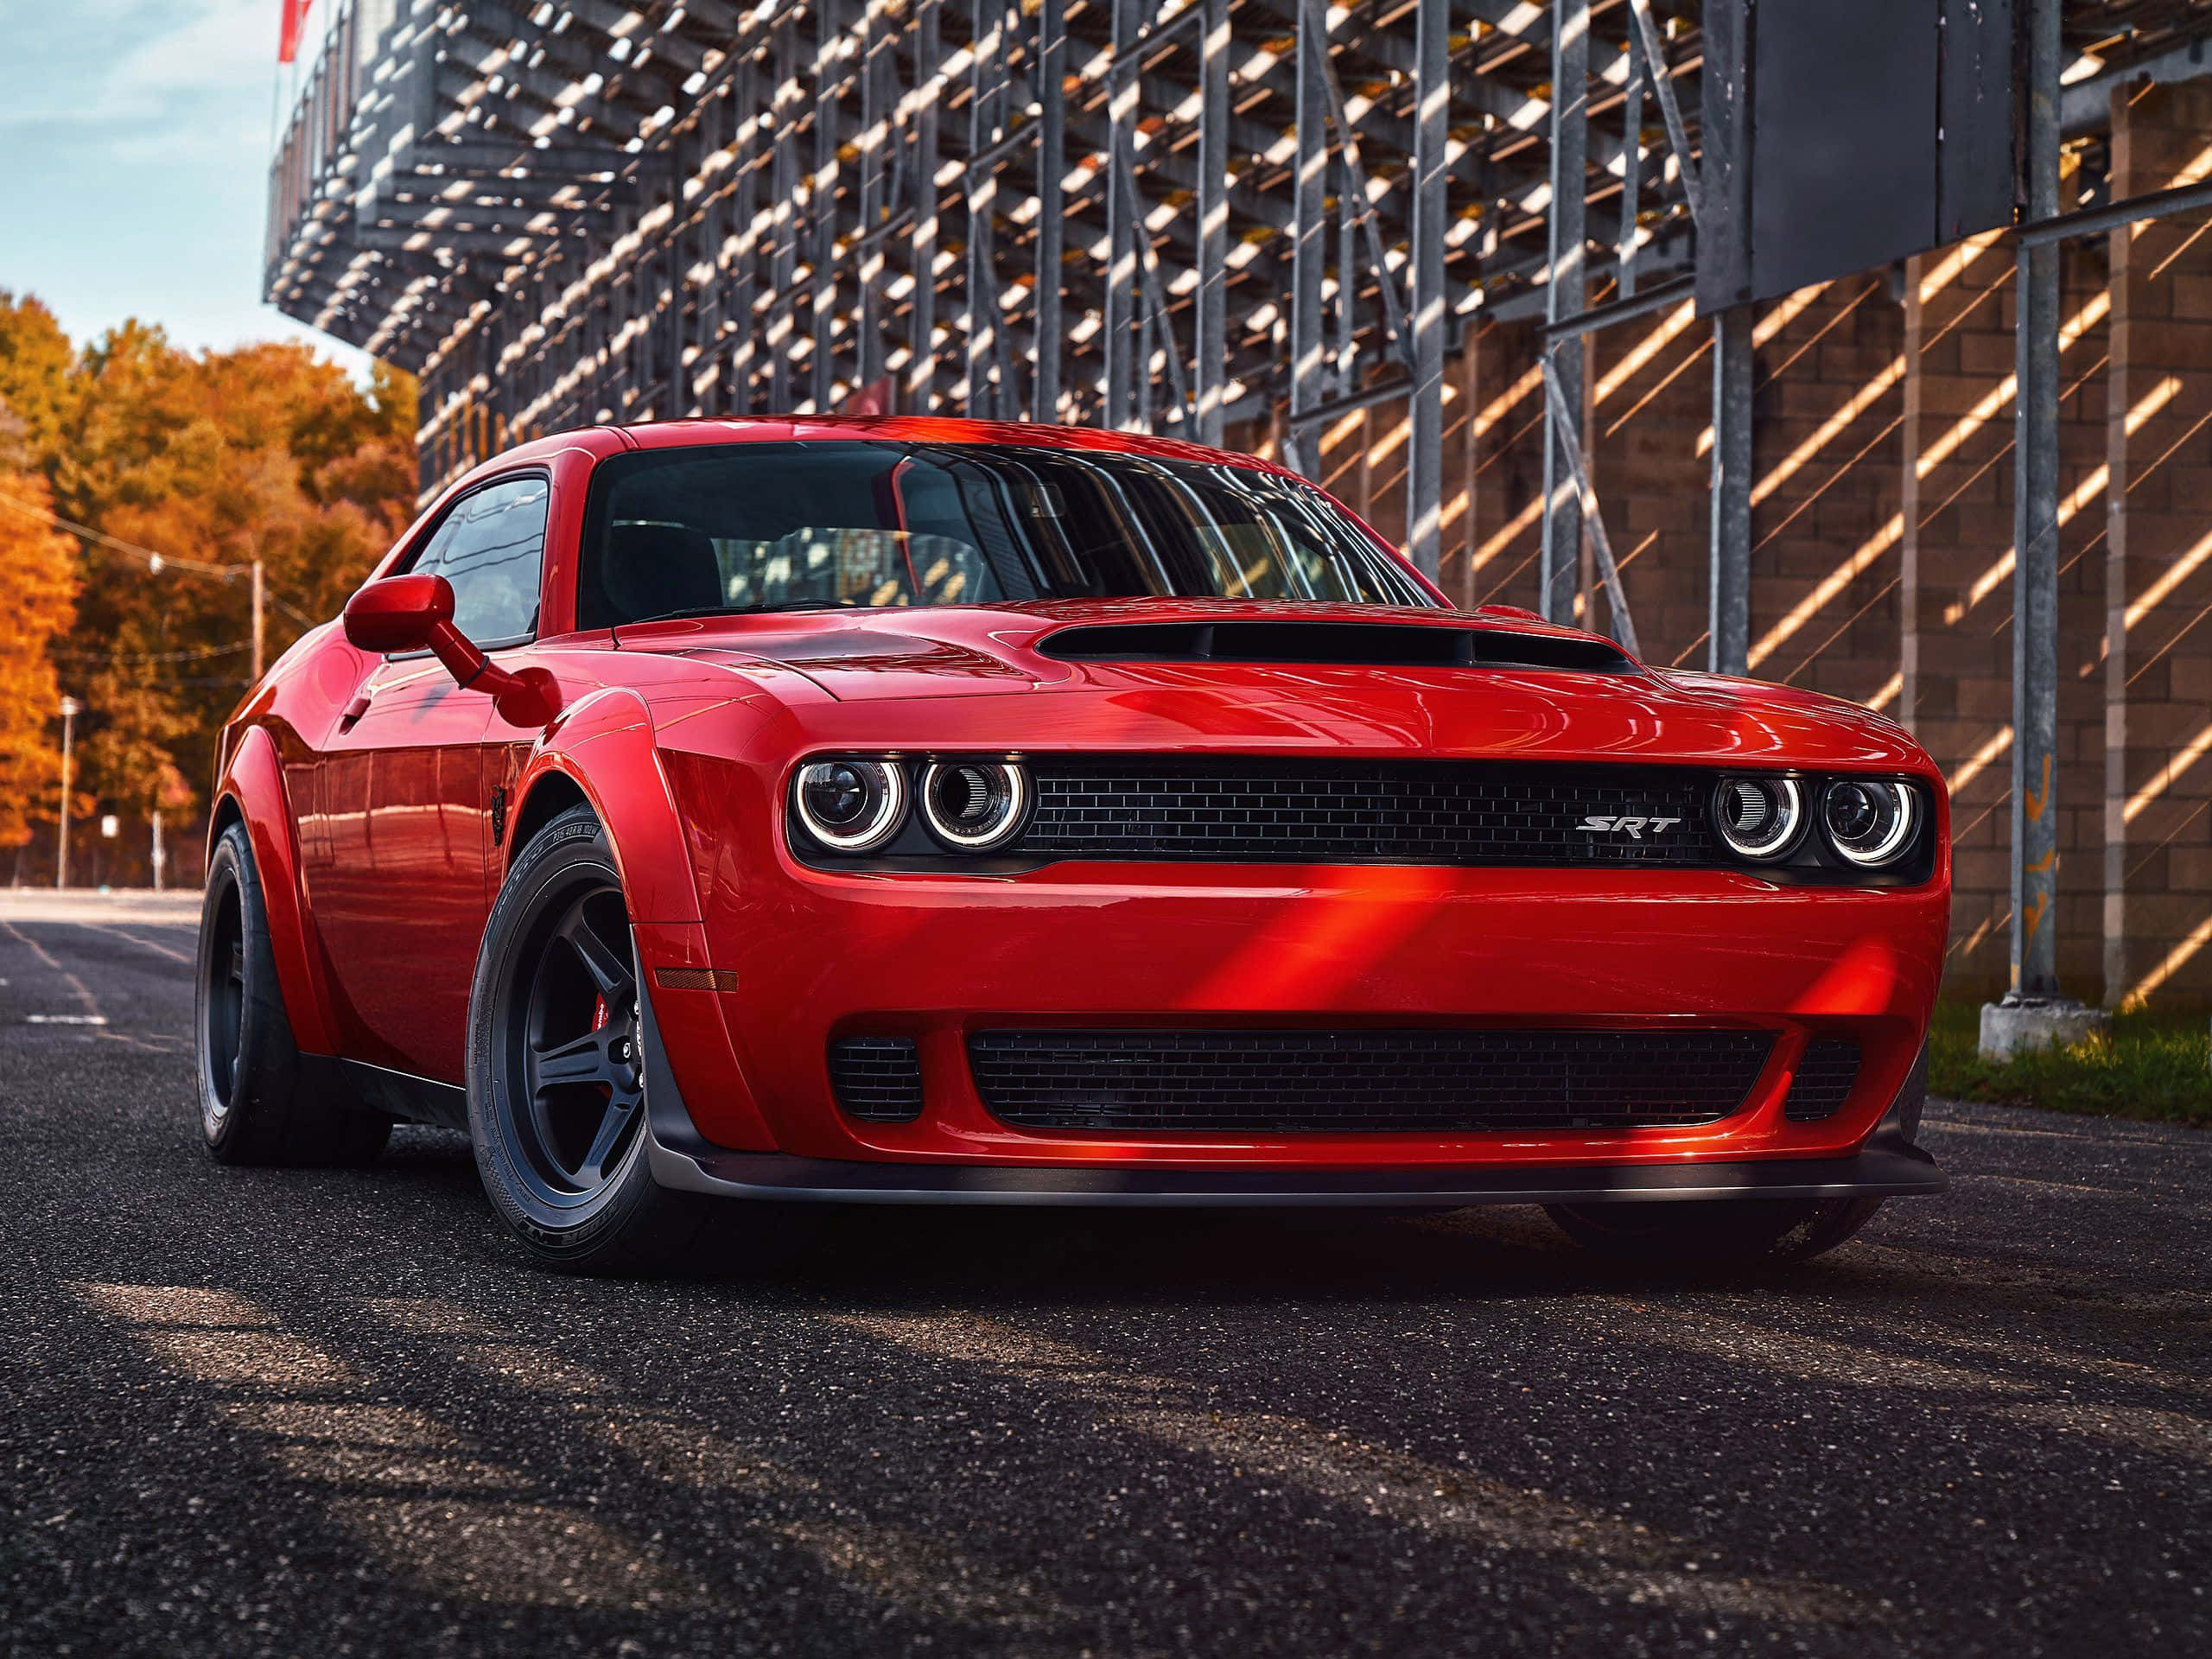 A Red Dodge Challenger Parked On A Street Wallpaper